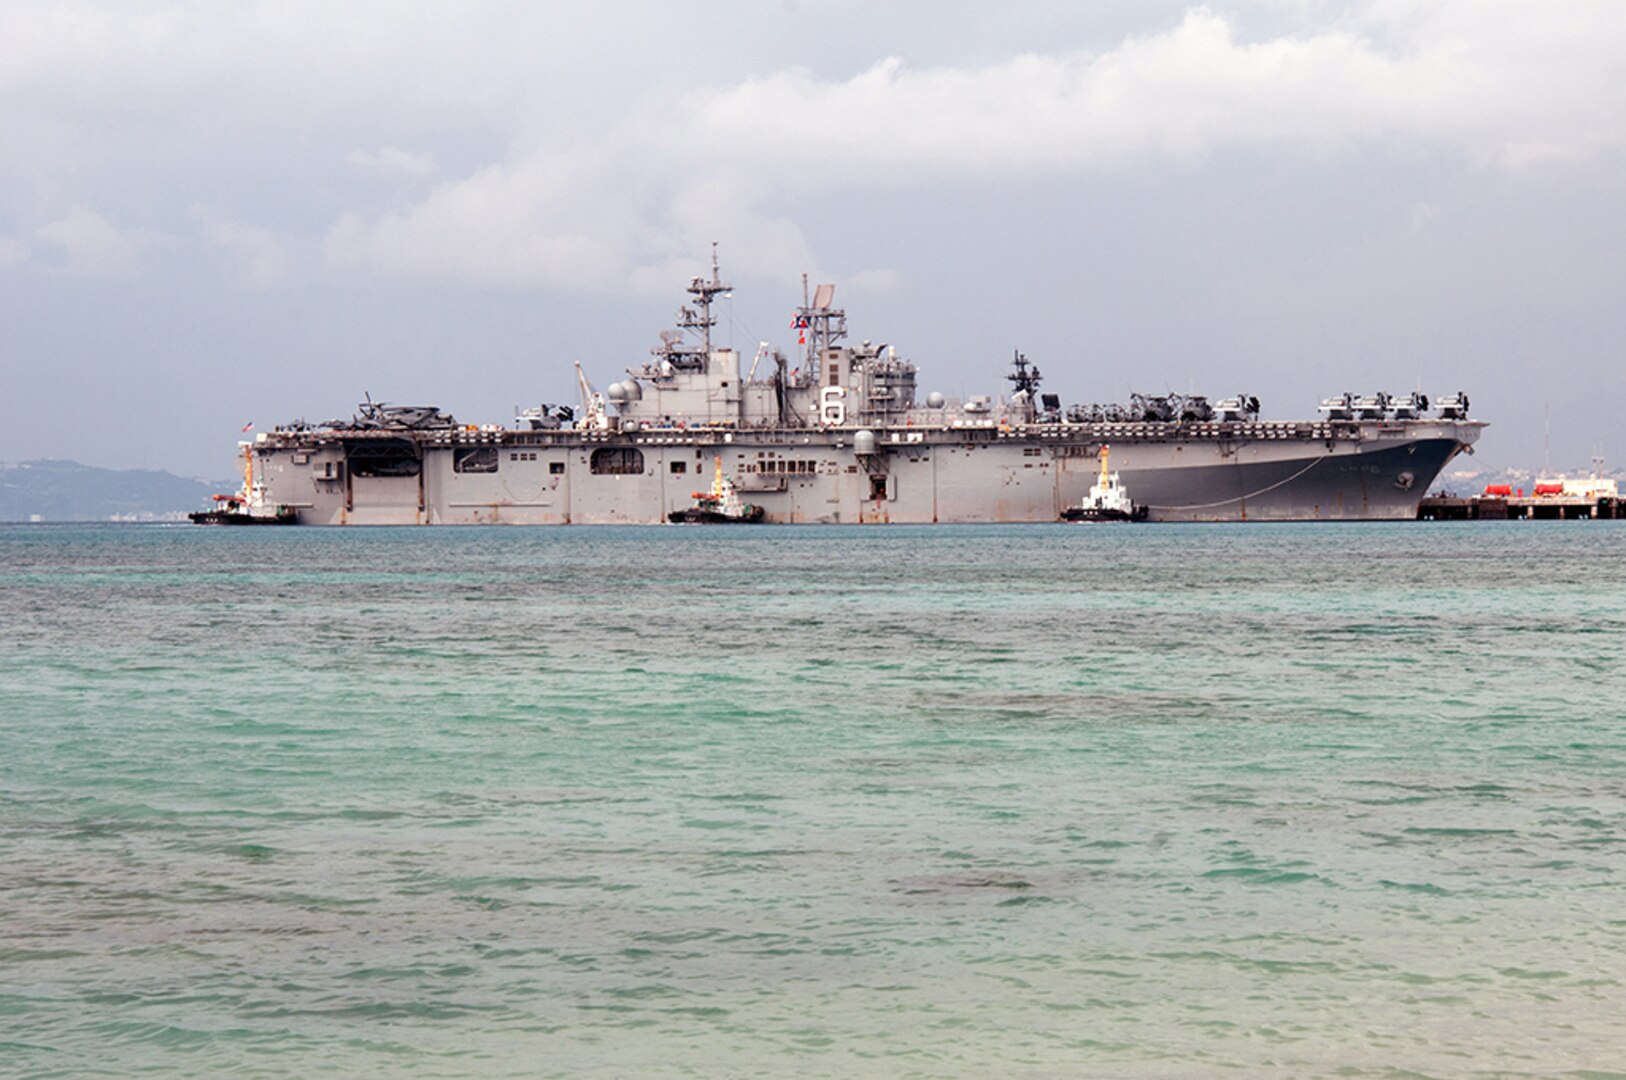 Okinawa, JAPAN (Feb. 6, 2016) Amphibious assault ship USS Bonhomme Richard (LHD 6) departs White Beach Naval Facility after embarking Marines assigned to the 31st Marine Expeditionary Unit (31st MEU). Bonhomme Richard, flagship of the Bonhomme Richard Amphibious Ready Group (ARG) with embarked Amphibious Squadron (PHIBRON) 11 and the 31st MEU are on deployment to the U.S. 7th Fleet area of operations supporting security and stability in the Indo-Asia-Pacific region. 